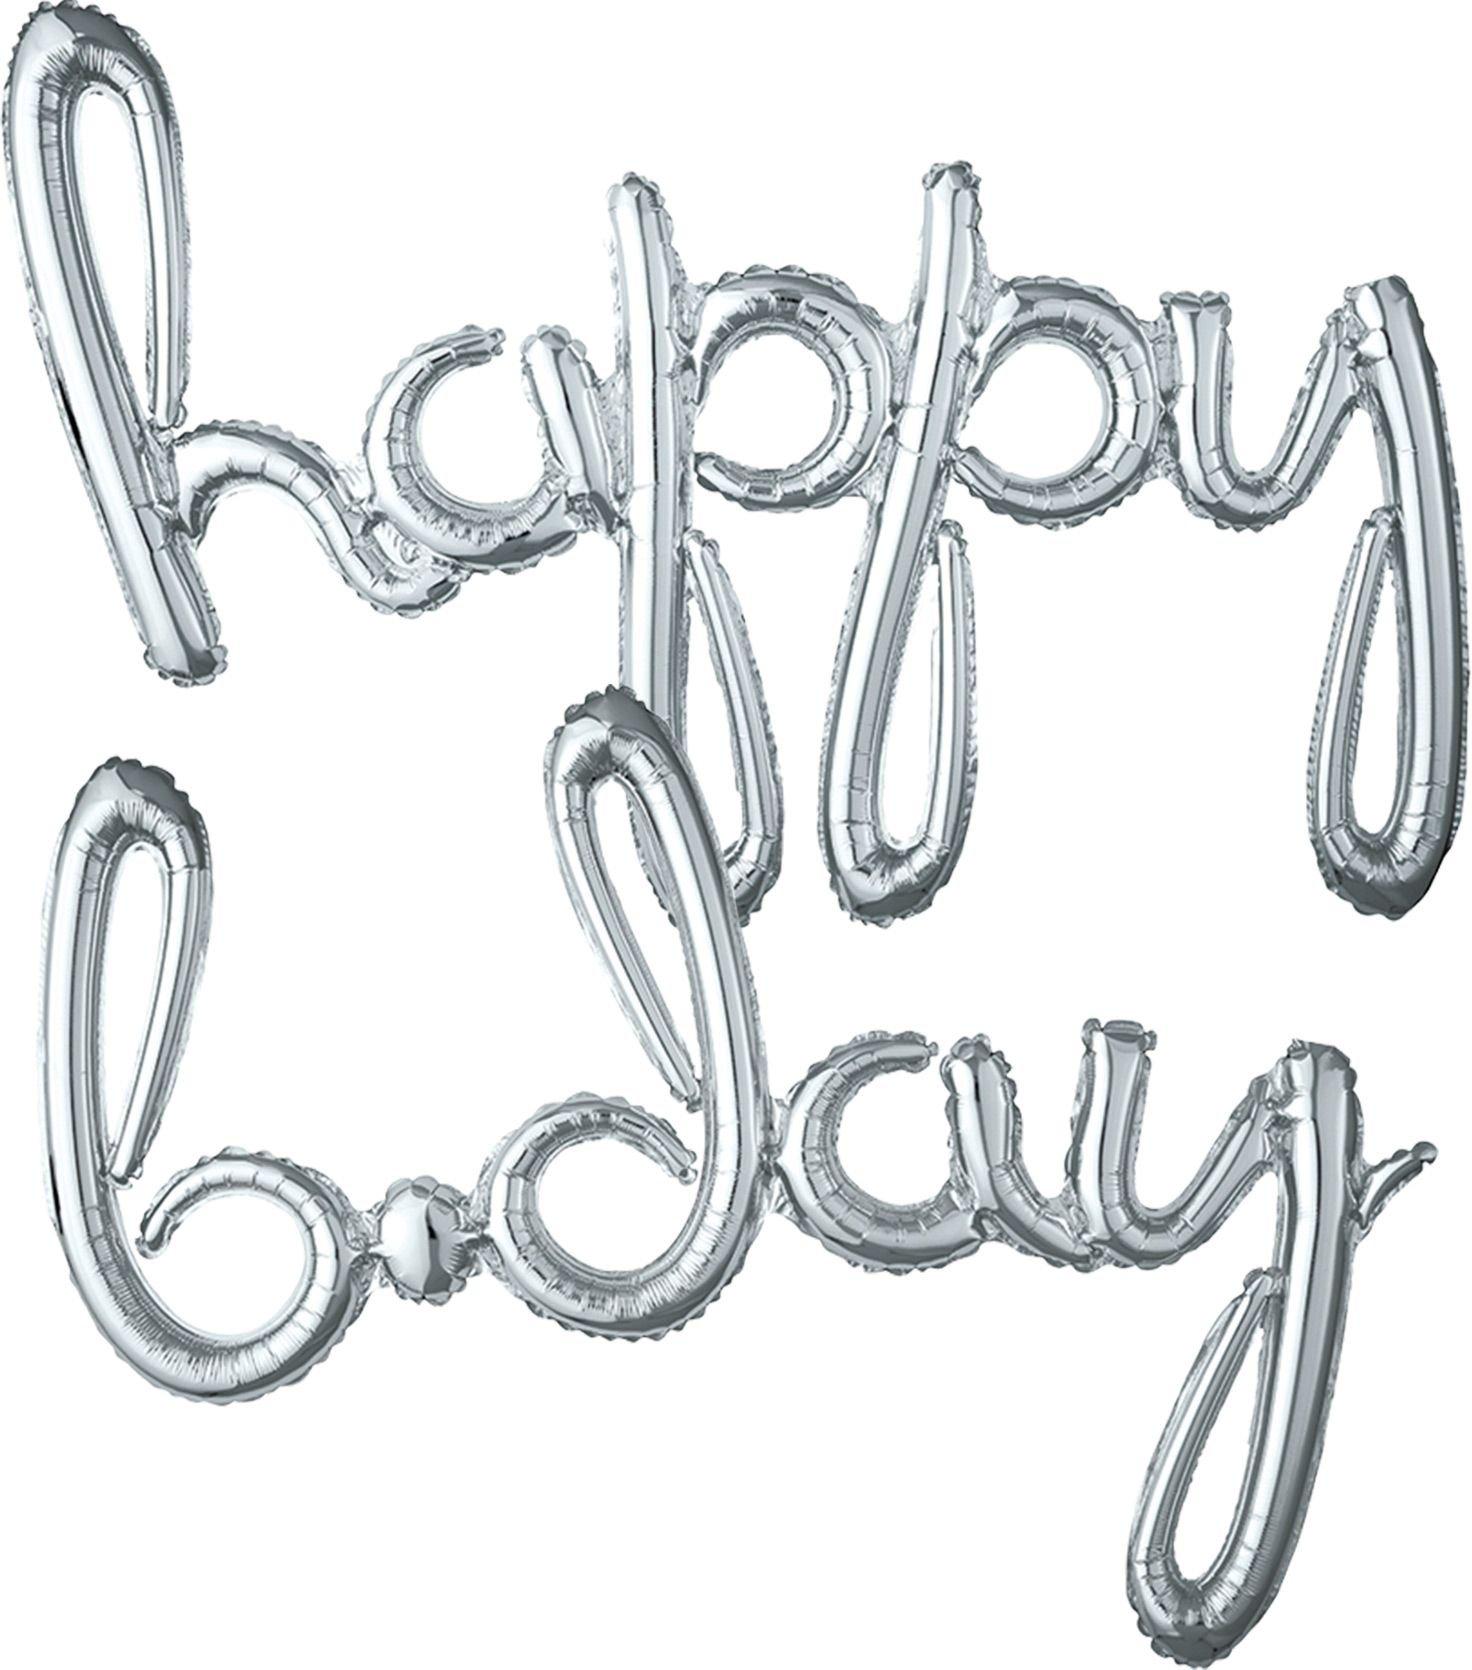 Air-Filled Silver Happy B-Day Cursive Letter Balloon Banners 2ct, 27in